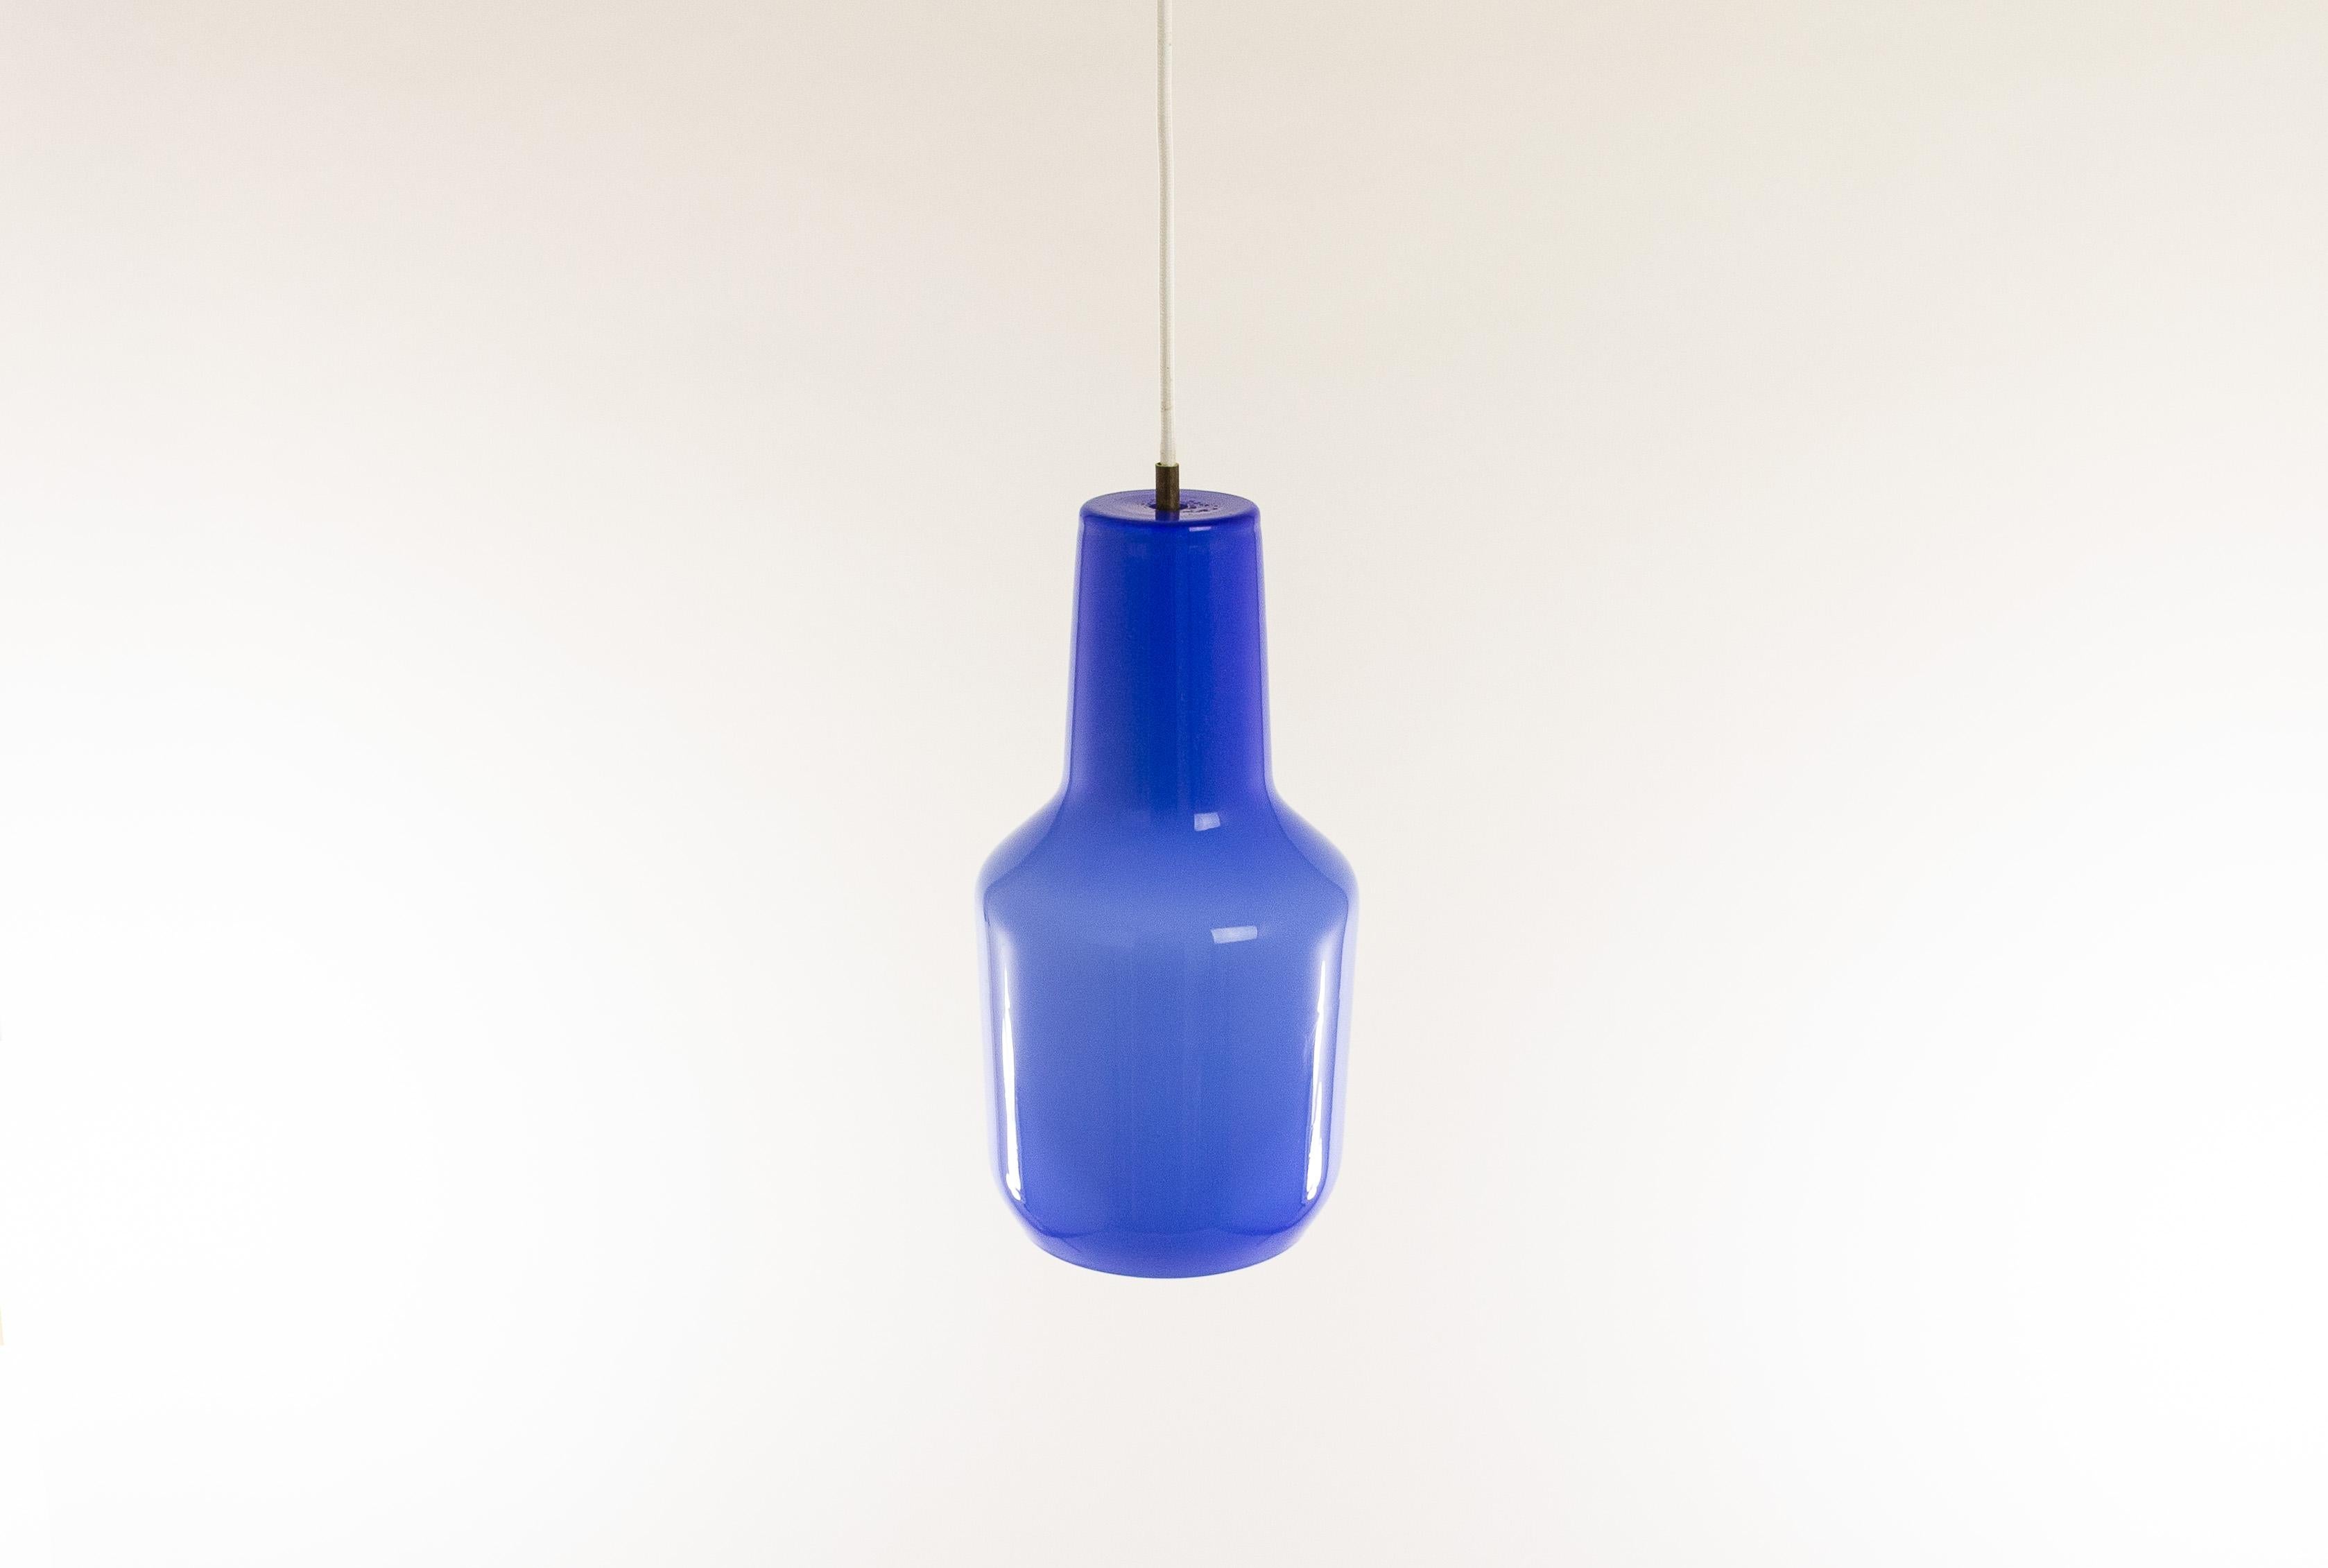 Hand blown blue glass pendant designed by Massimo Vignelli at the start of his impressive career in design and produced by Murano glass specialist Venini.

This model was made in three sizes: 25 cm, 30 cm and 39 cm high. This one is the middle